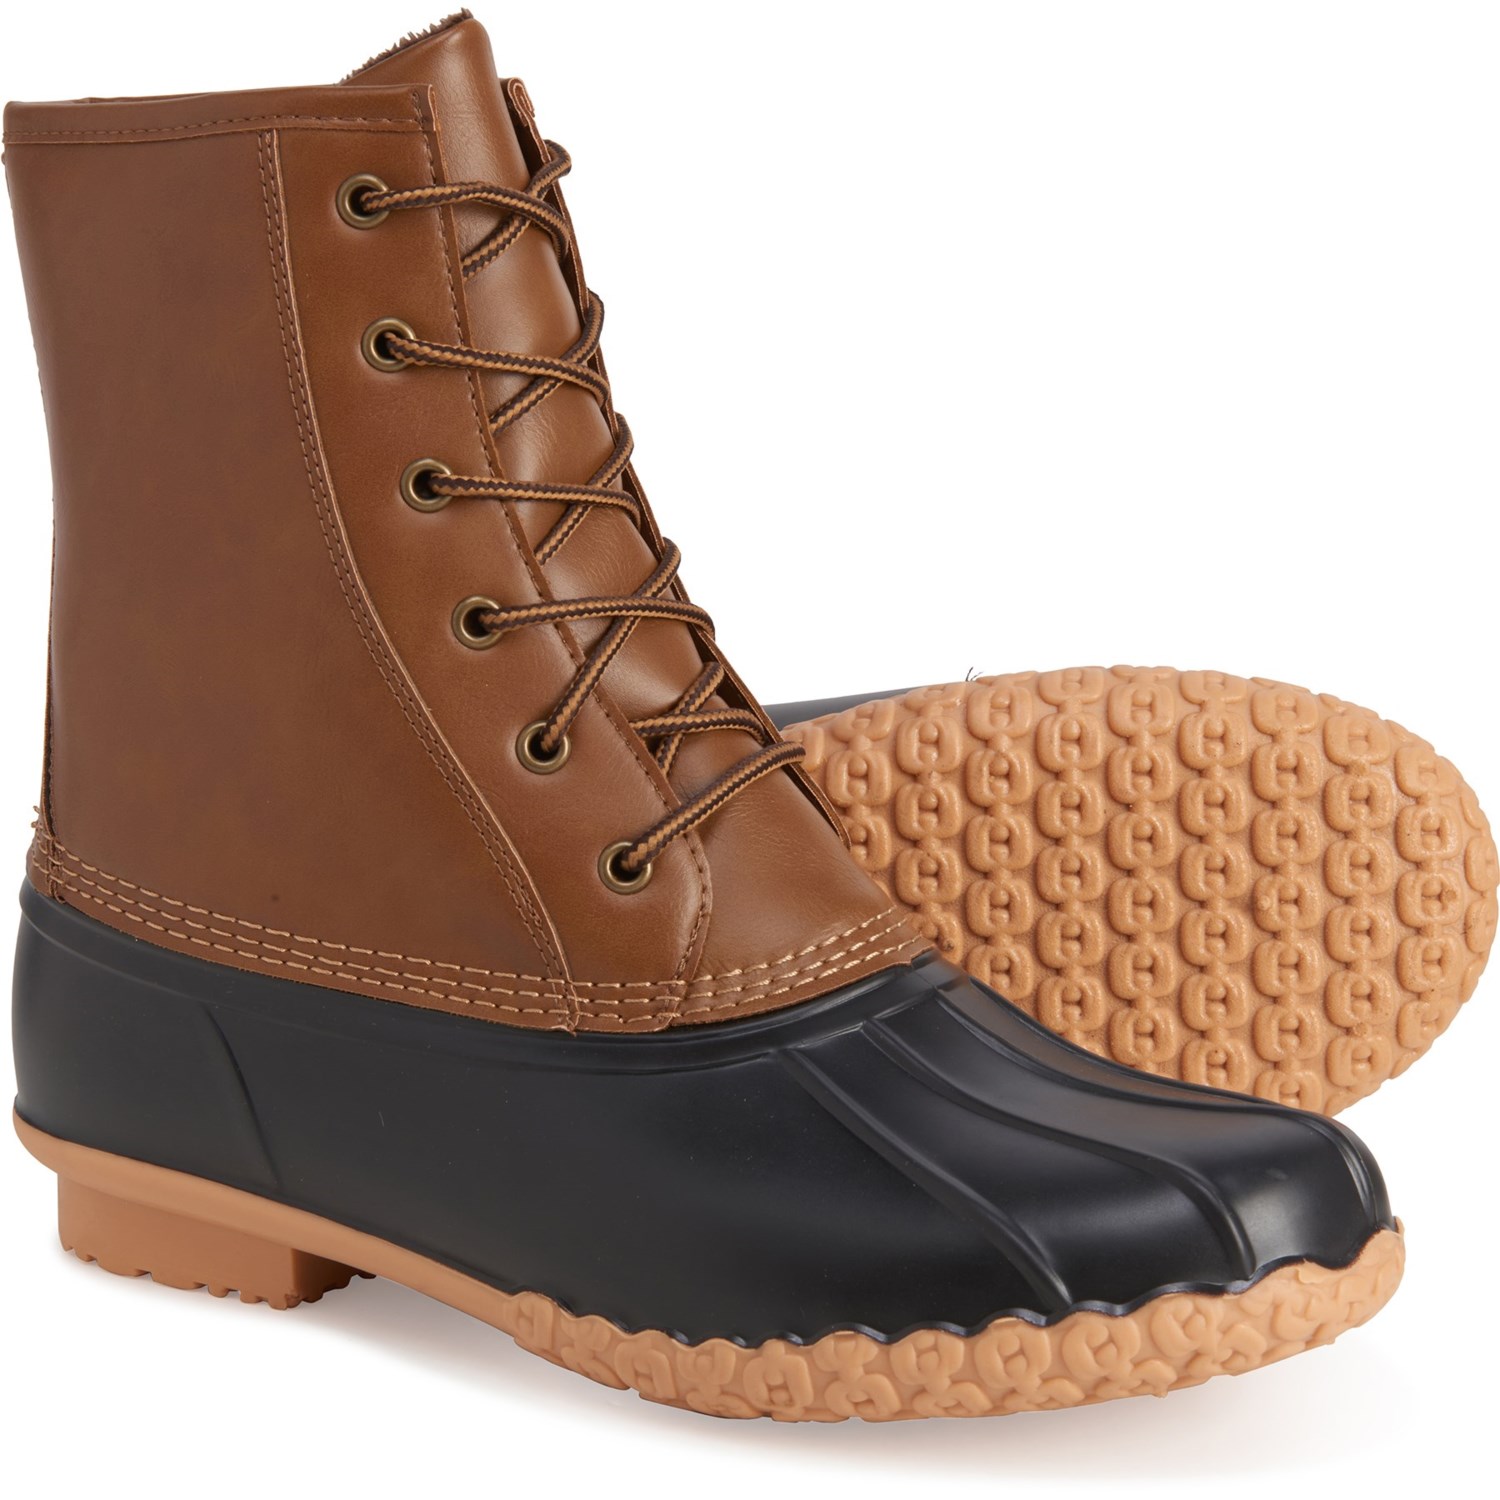 Khombu Lace-Up Duck Boots (For Men) - Save 72%